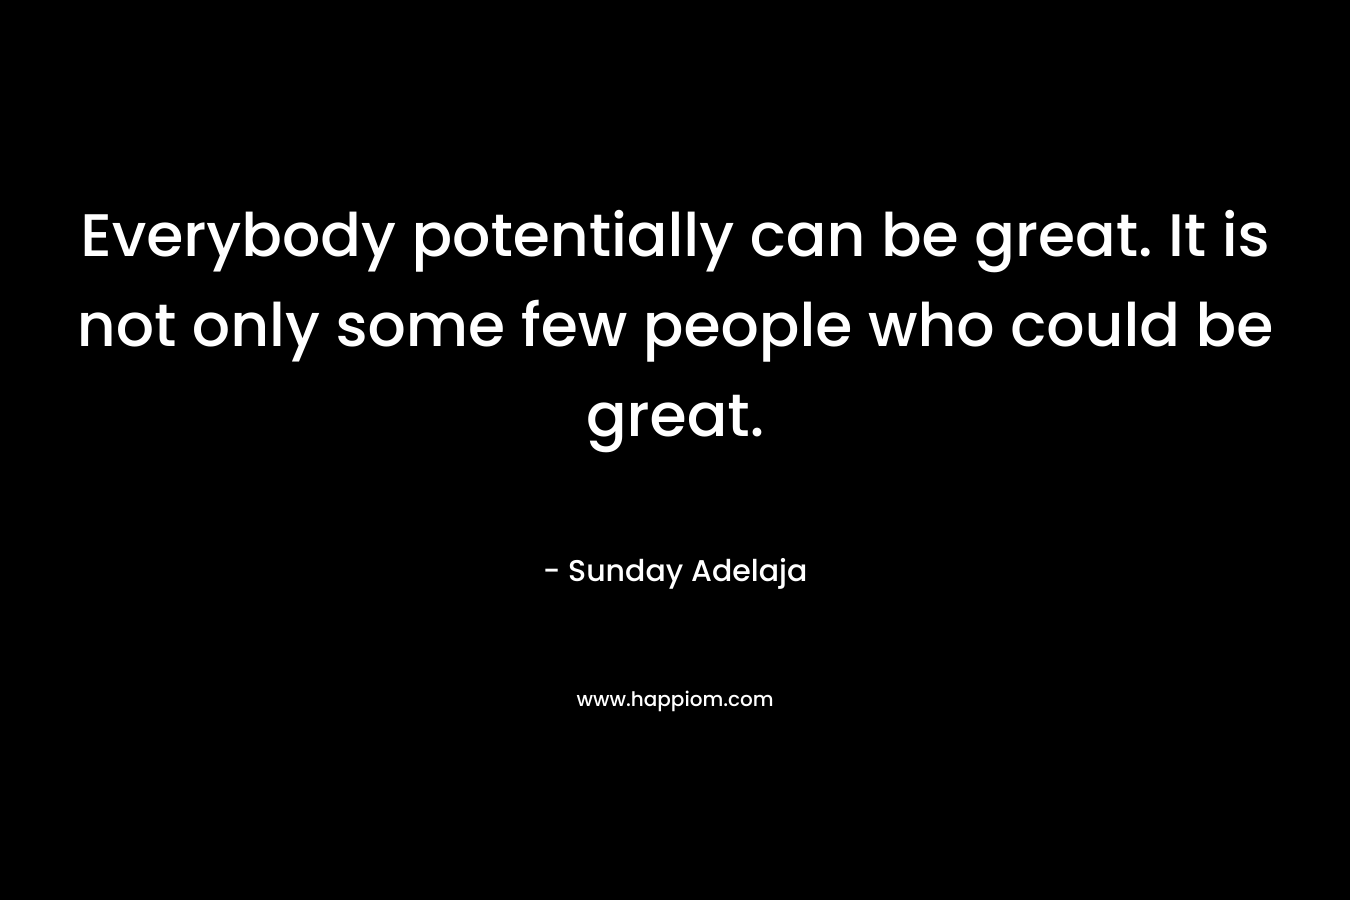 Everybody potentially can be great. It is not only some few people who could be great.